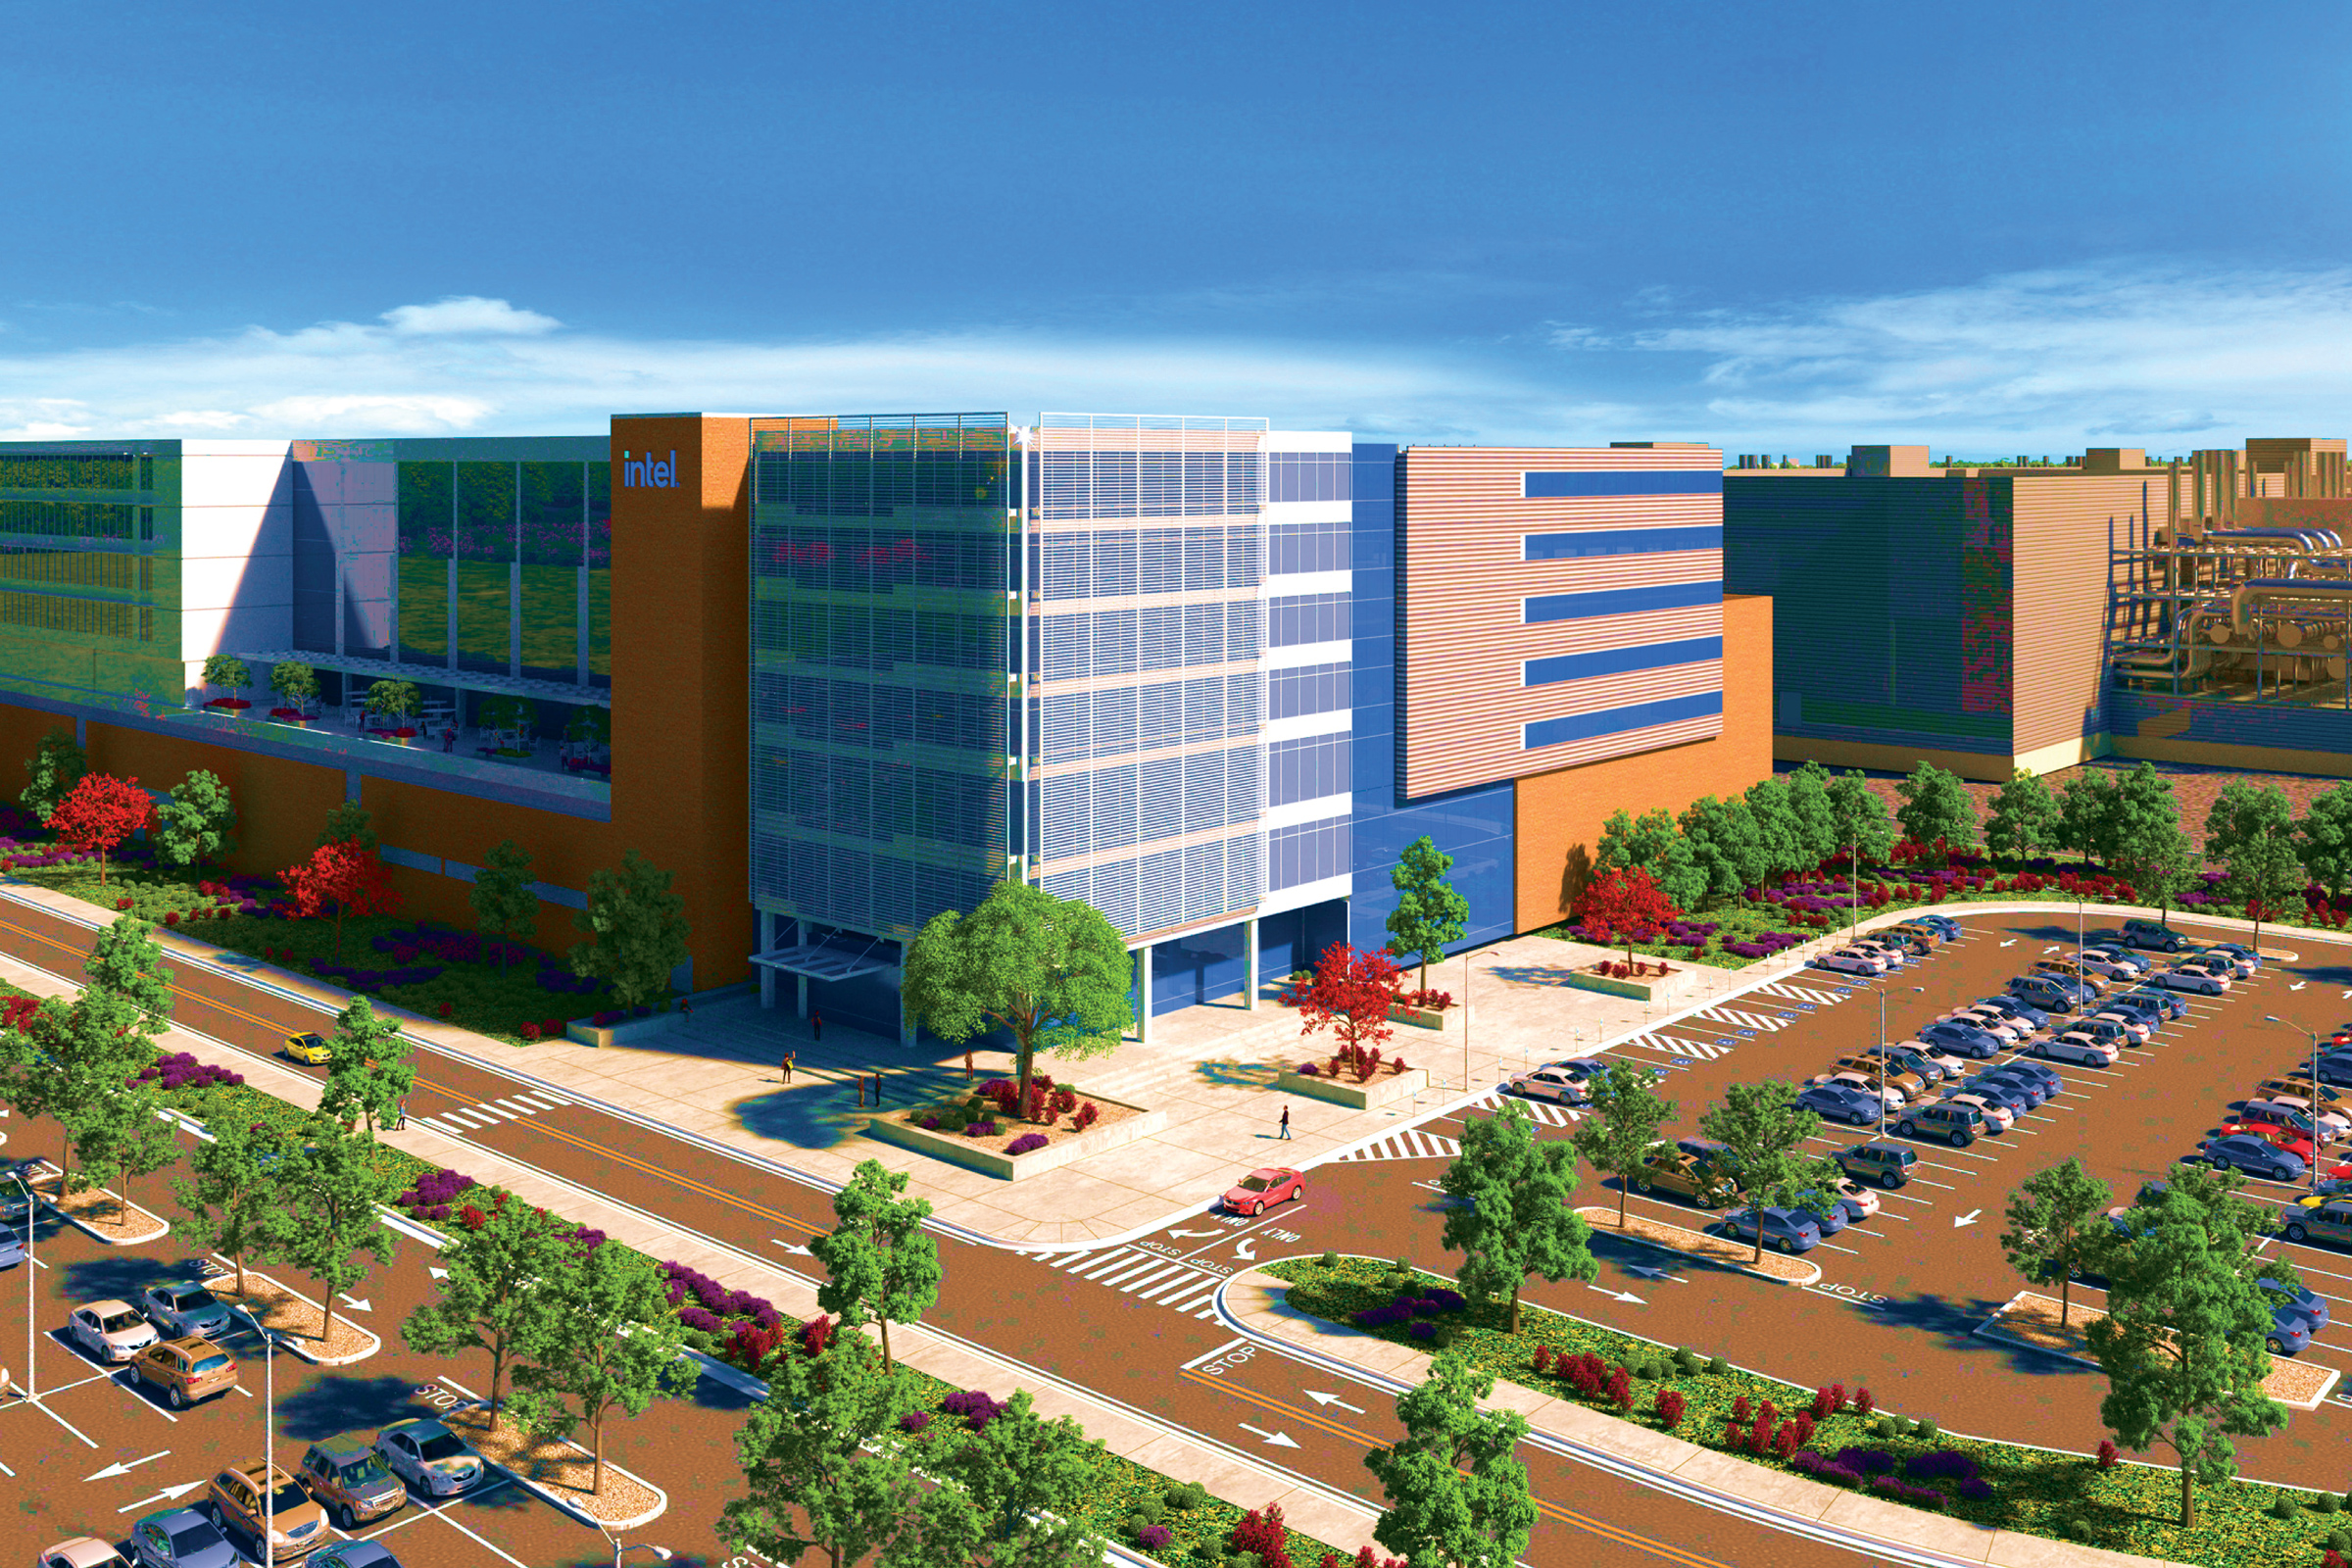 A rendering of Intel's planned factory in New Albany, Ohio. (Courtesy of Intel)